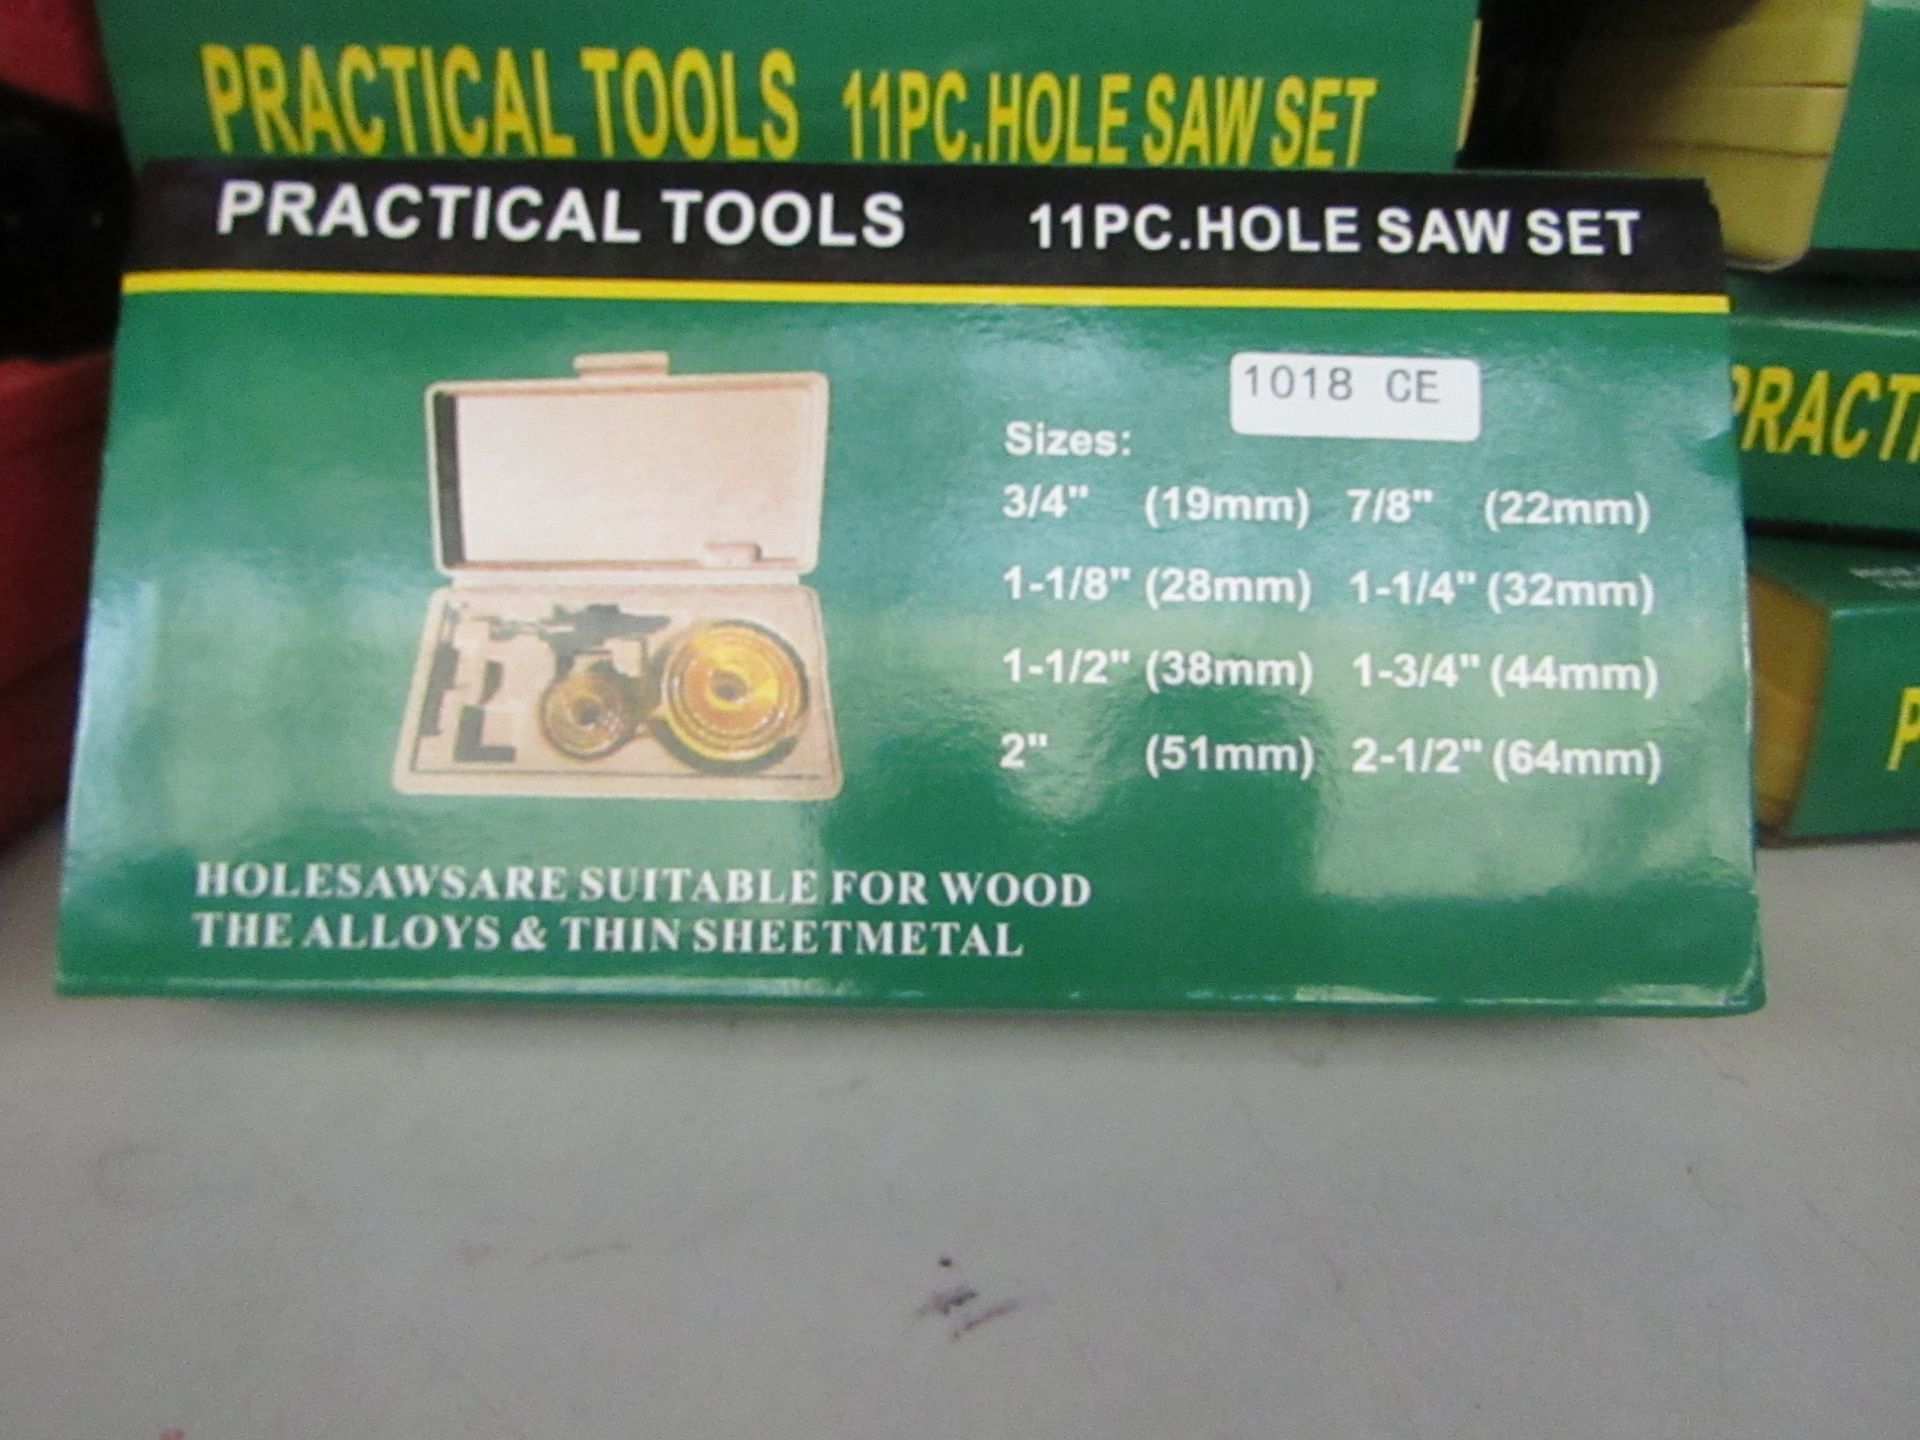 Practical tools 11 piece hole saw set in carry case